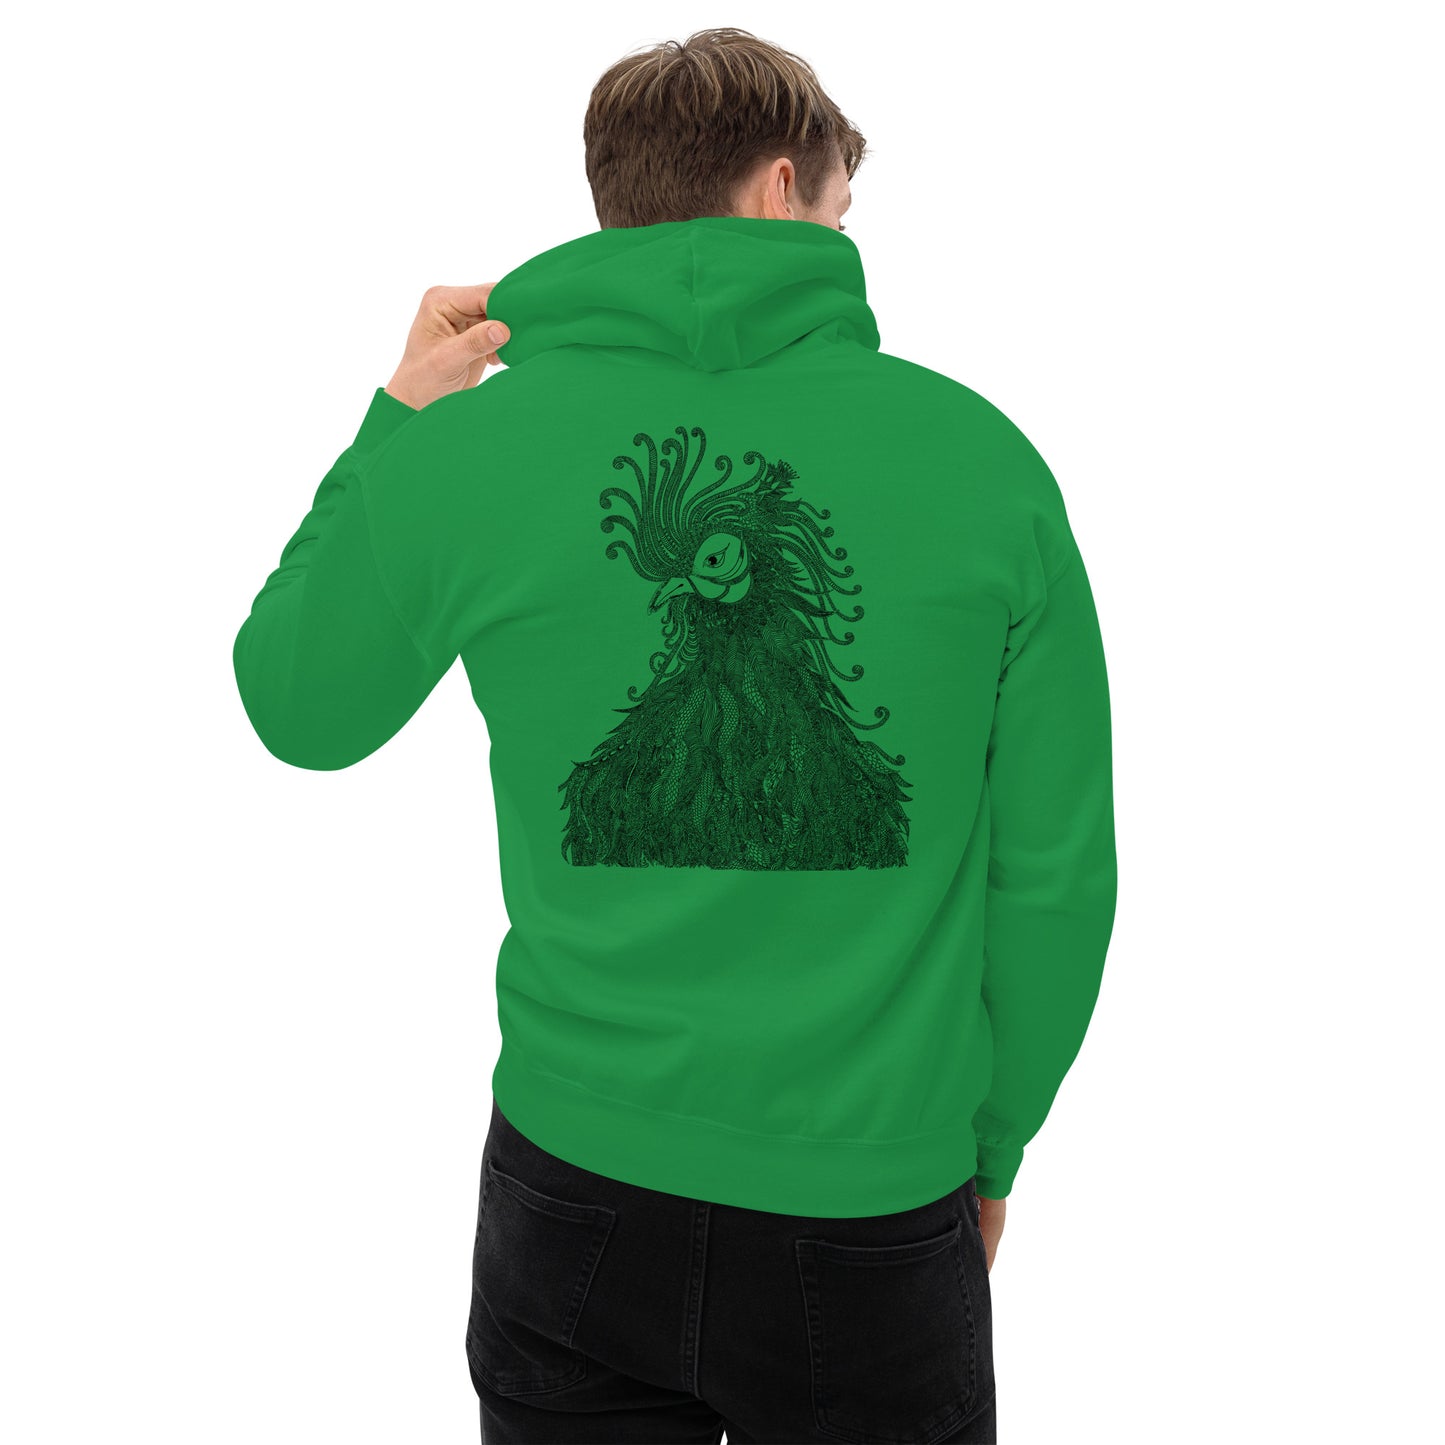 Cozy Rooster Hoodie: Stylish Warmth at Your Fingertips